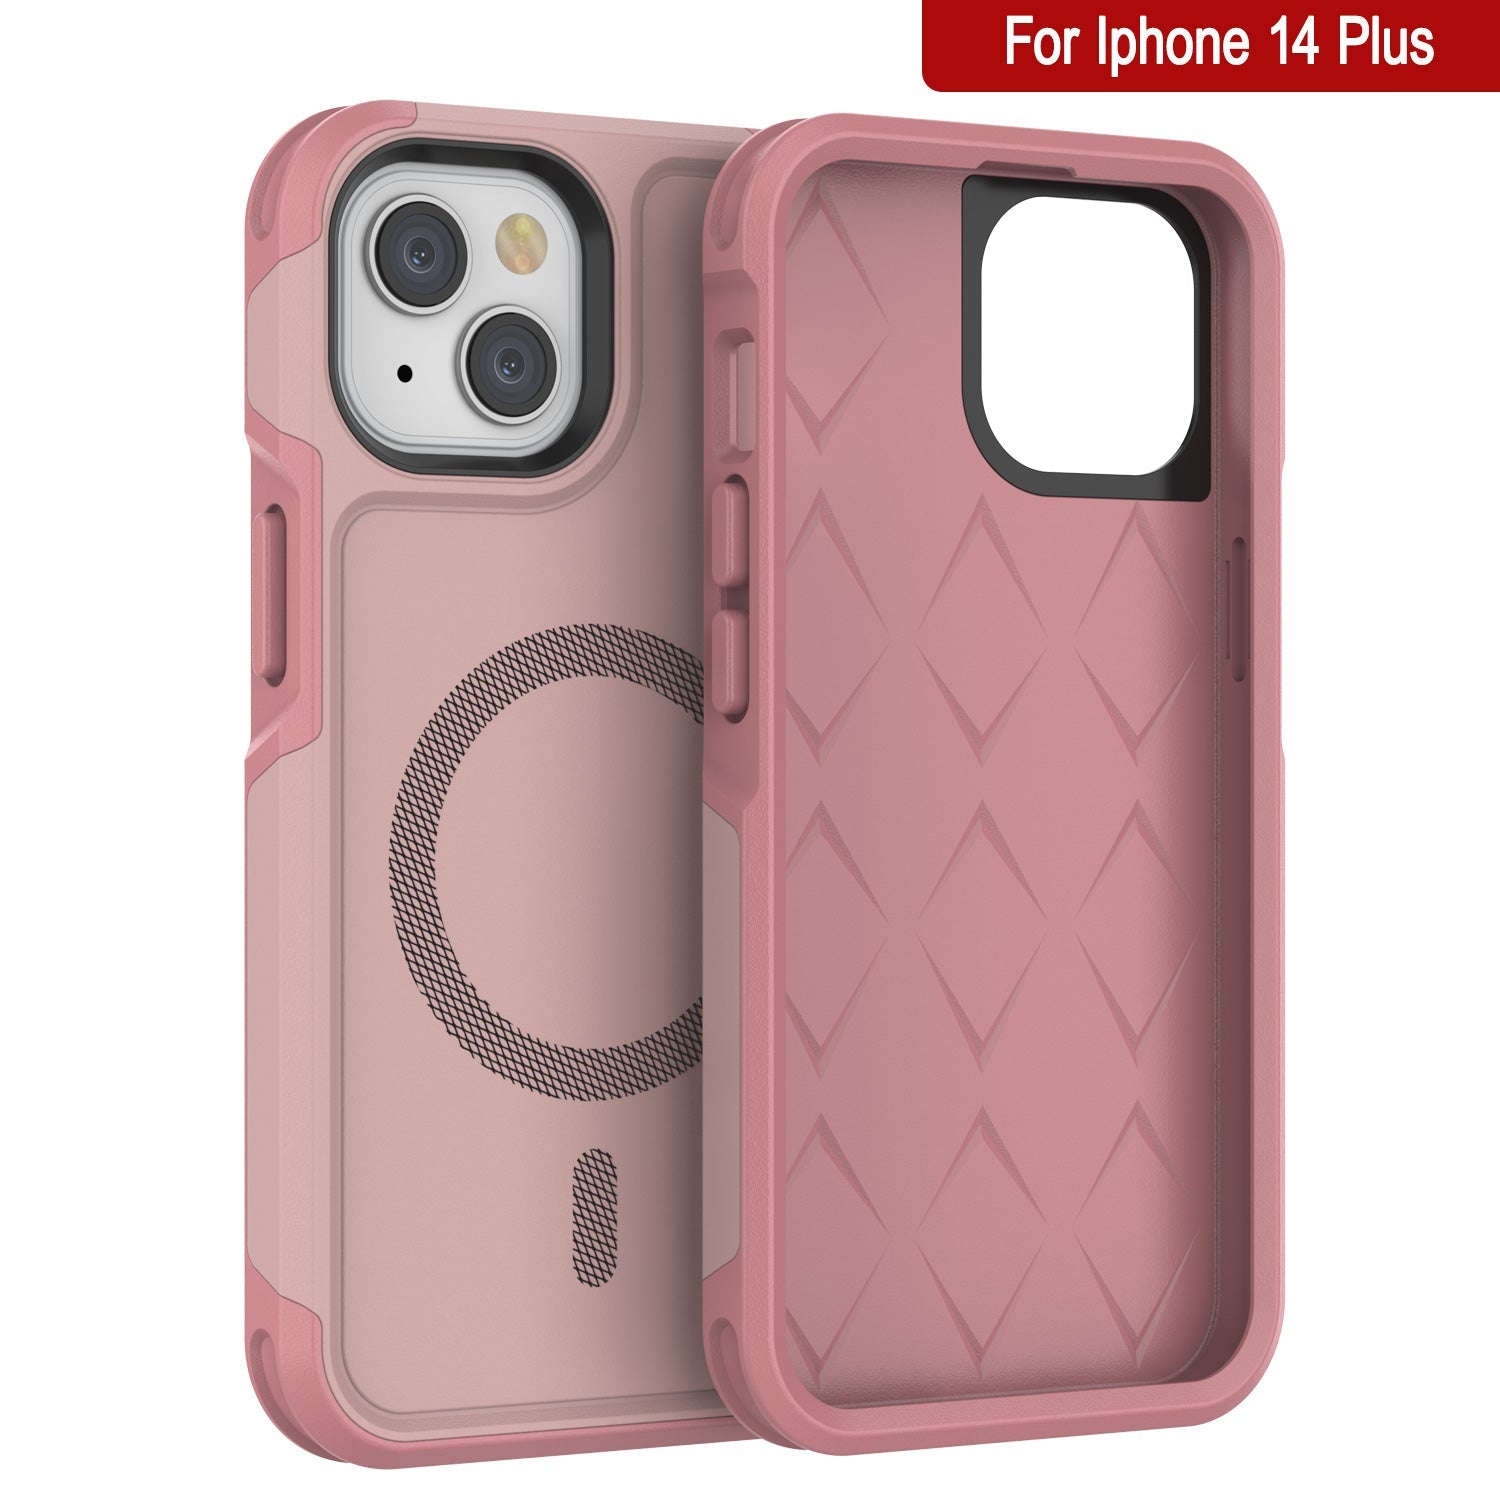 PunkCase iPhone 14 Plus Case, [Spartan 2.0 Series] Clear Rugged Heavy Duty Cover W/Built in Screen Protector [Pink]